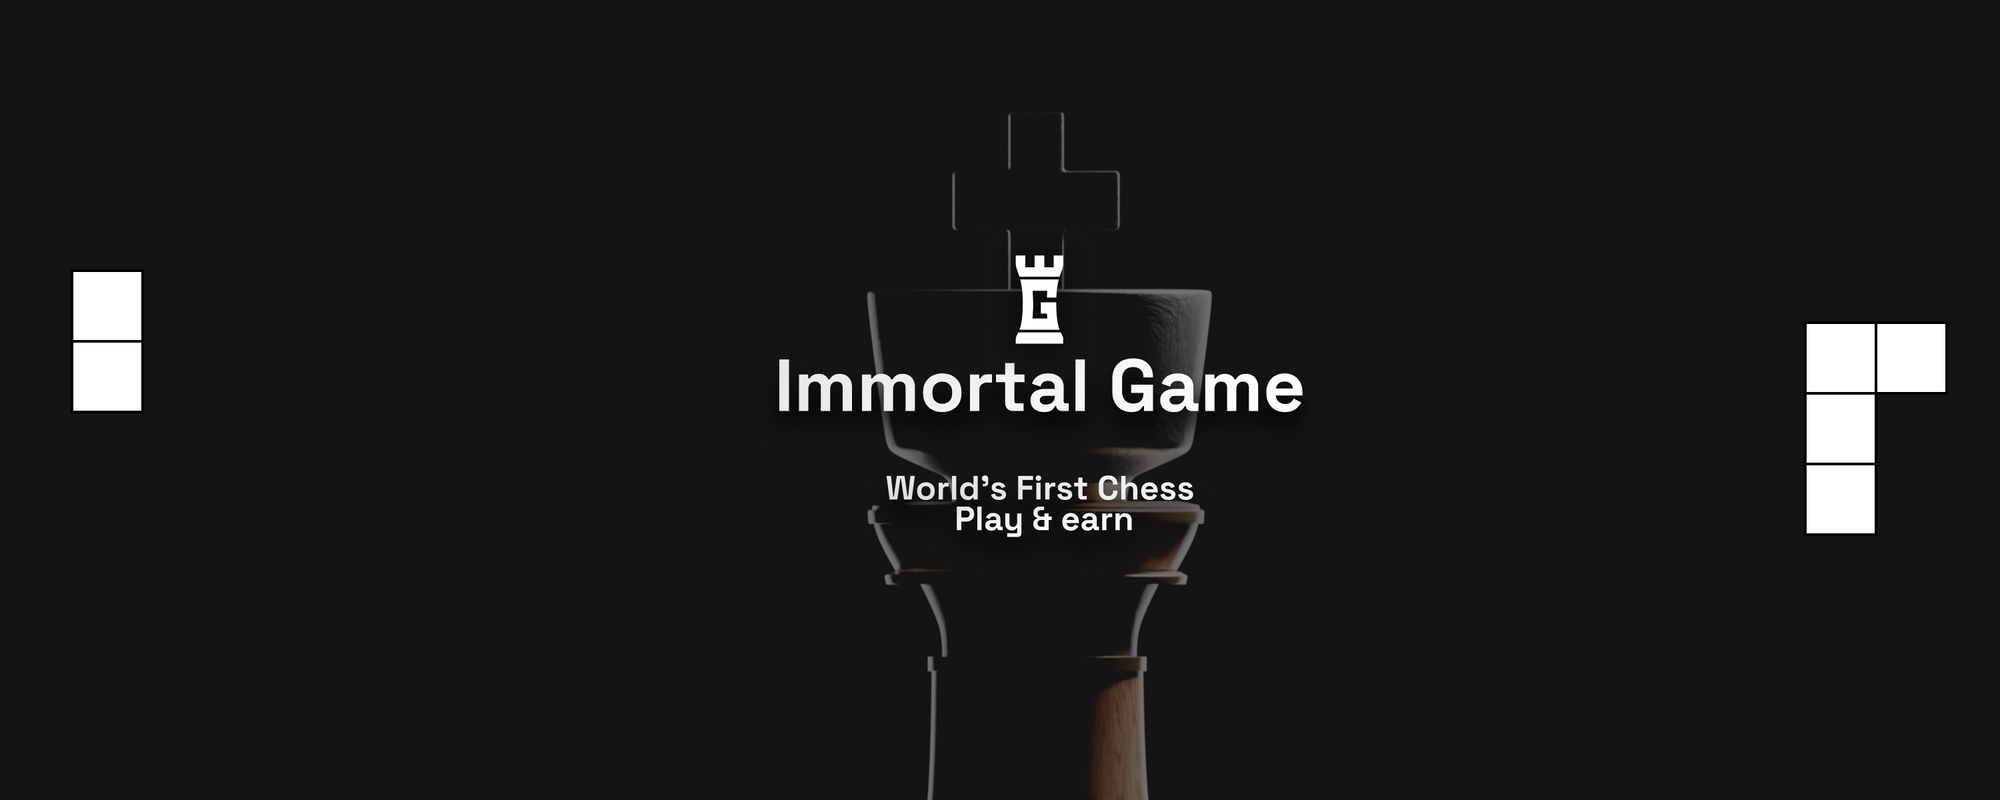 Immortal Game - Collection by Immortal-Game